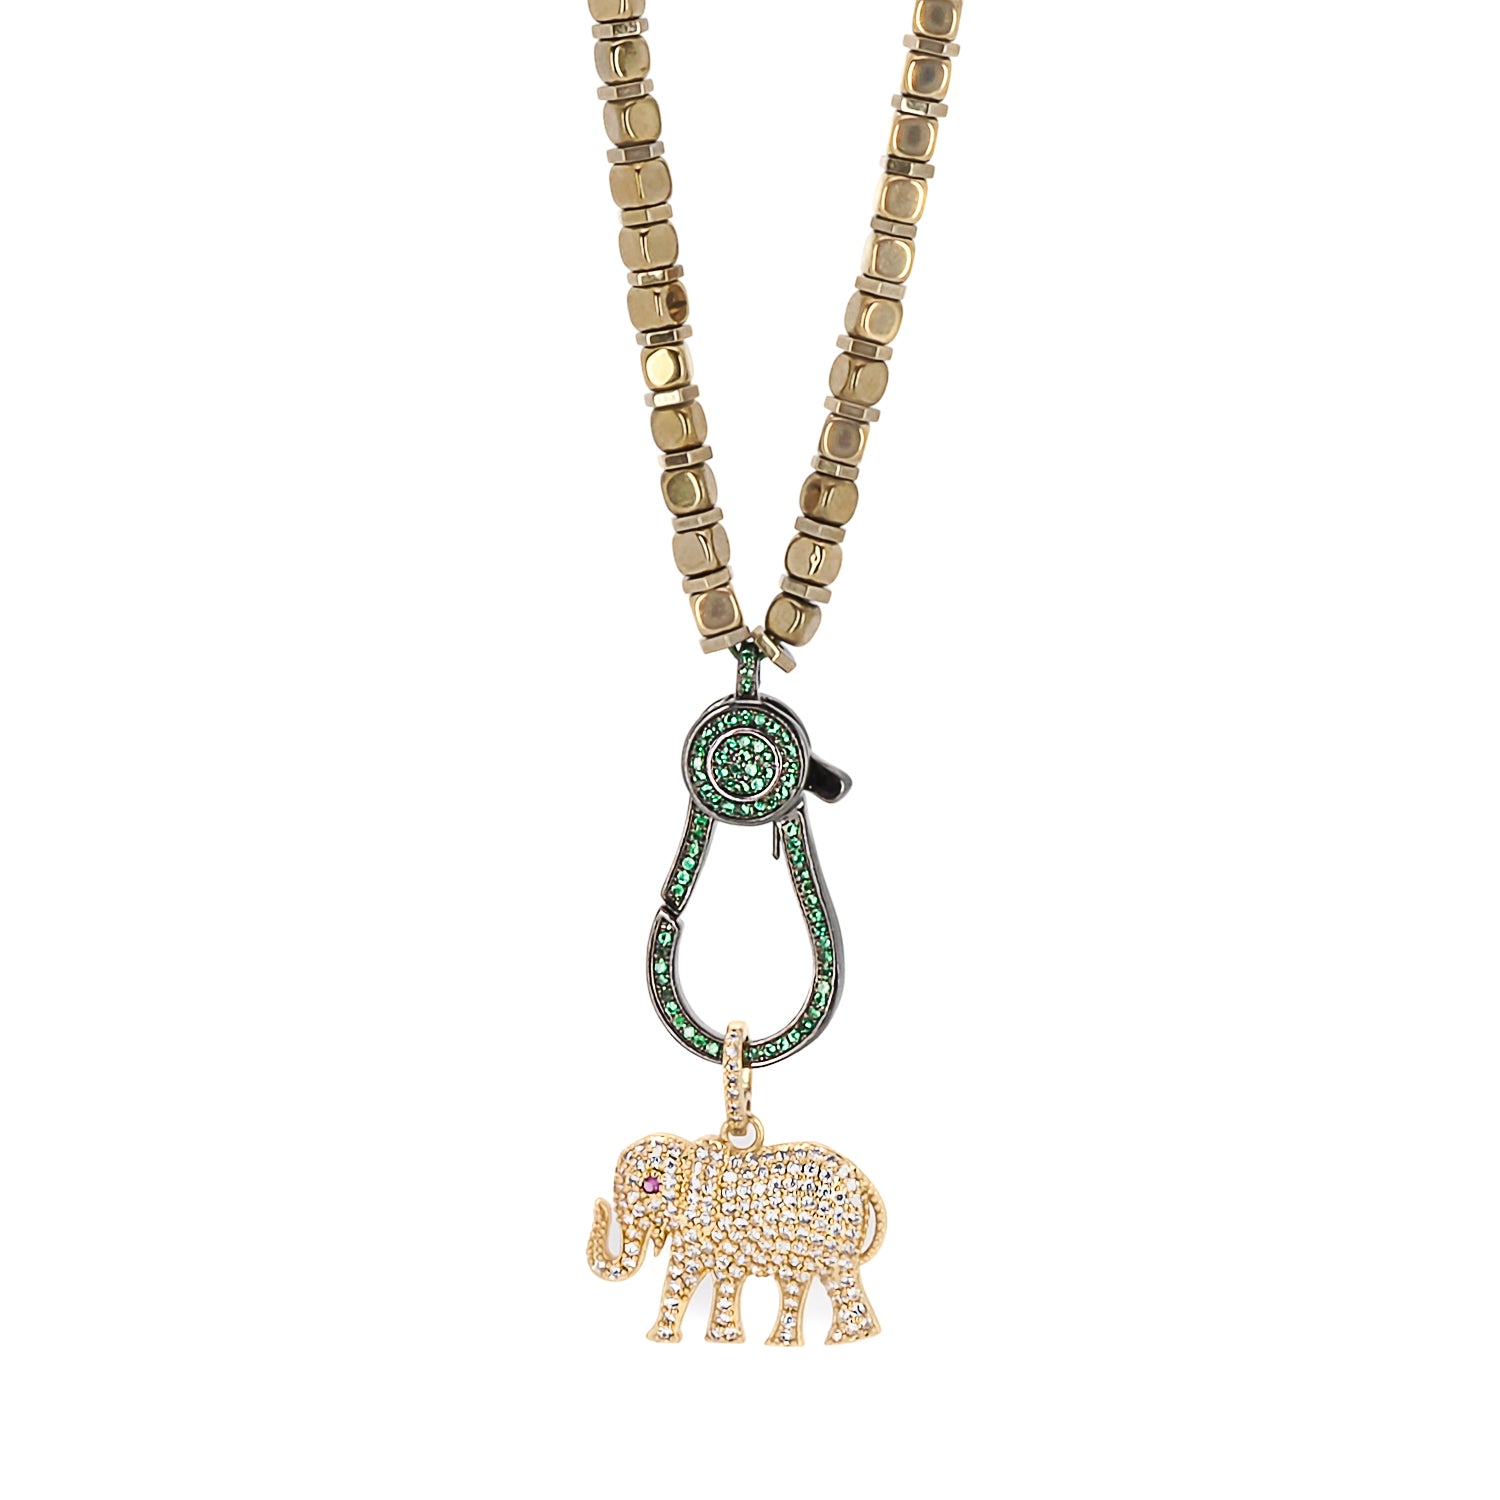 The Diamond Elephant Golden Necklace is an exquisite piece of jewelry that is sure to catch the eye of anyone who sees it. 